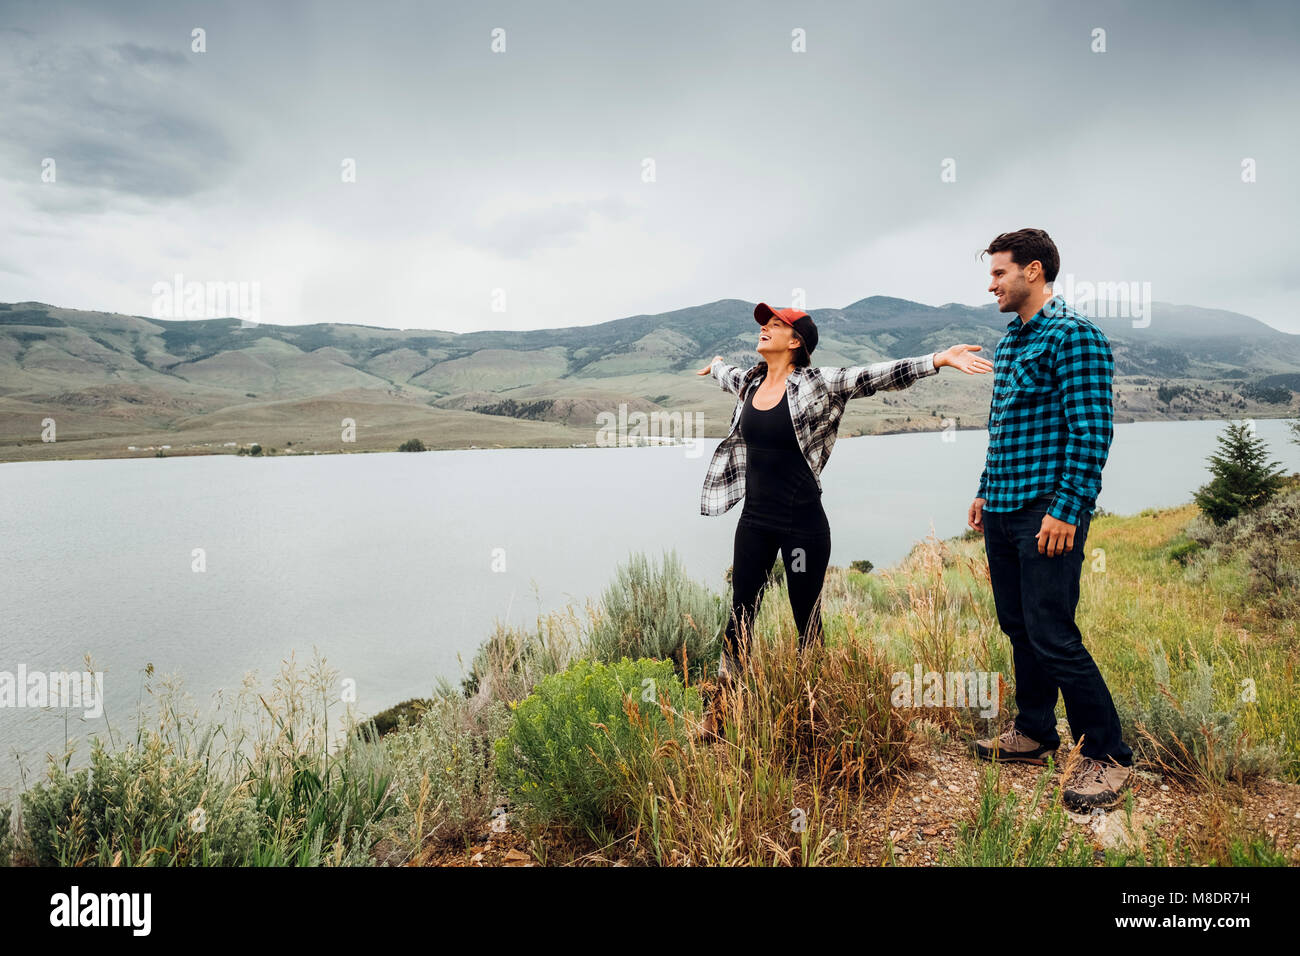 Couple walking near Dillon Reservoir, young woman's arms outstretched, Silverthorne, Colorado, USA Stock Photo